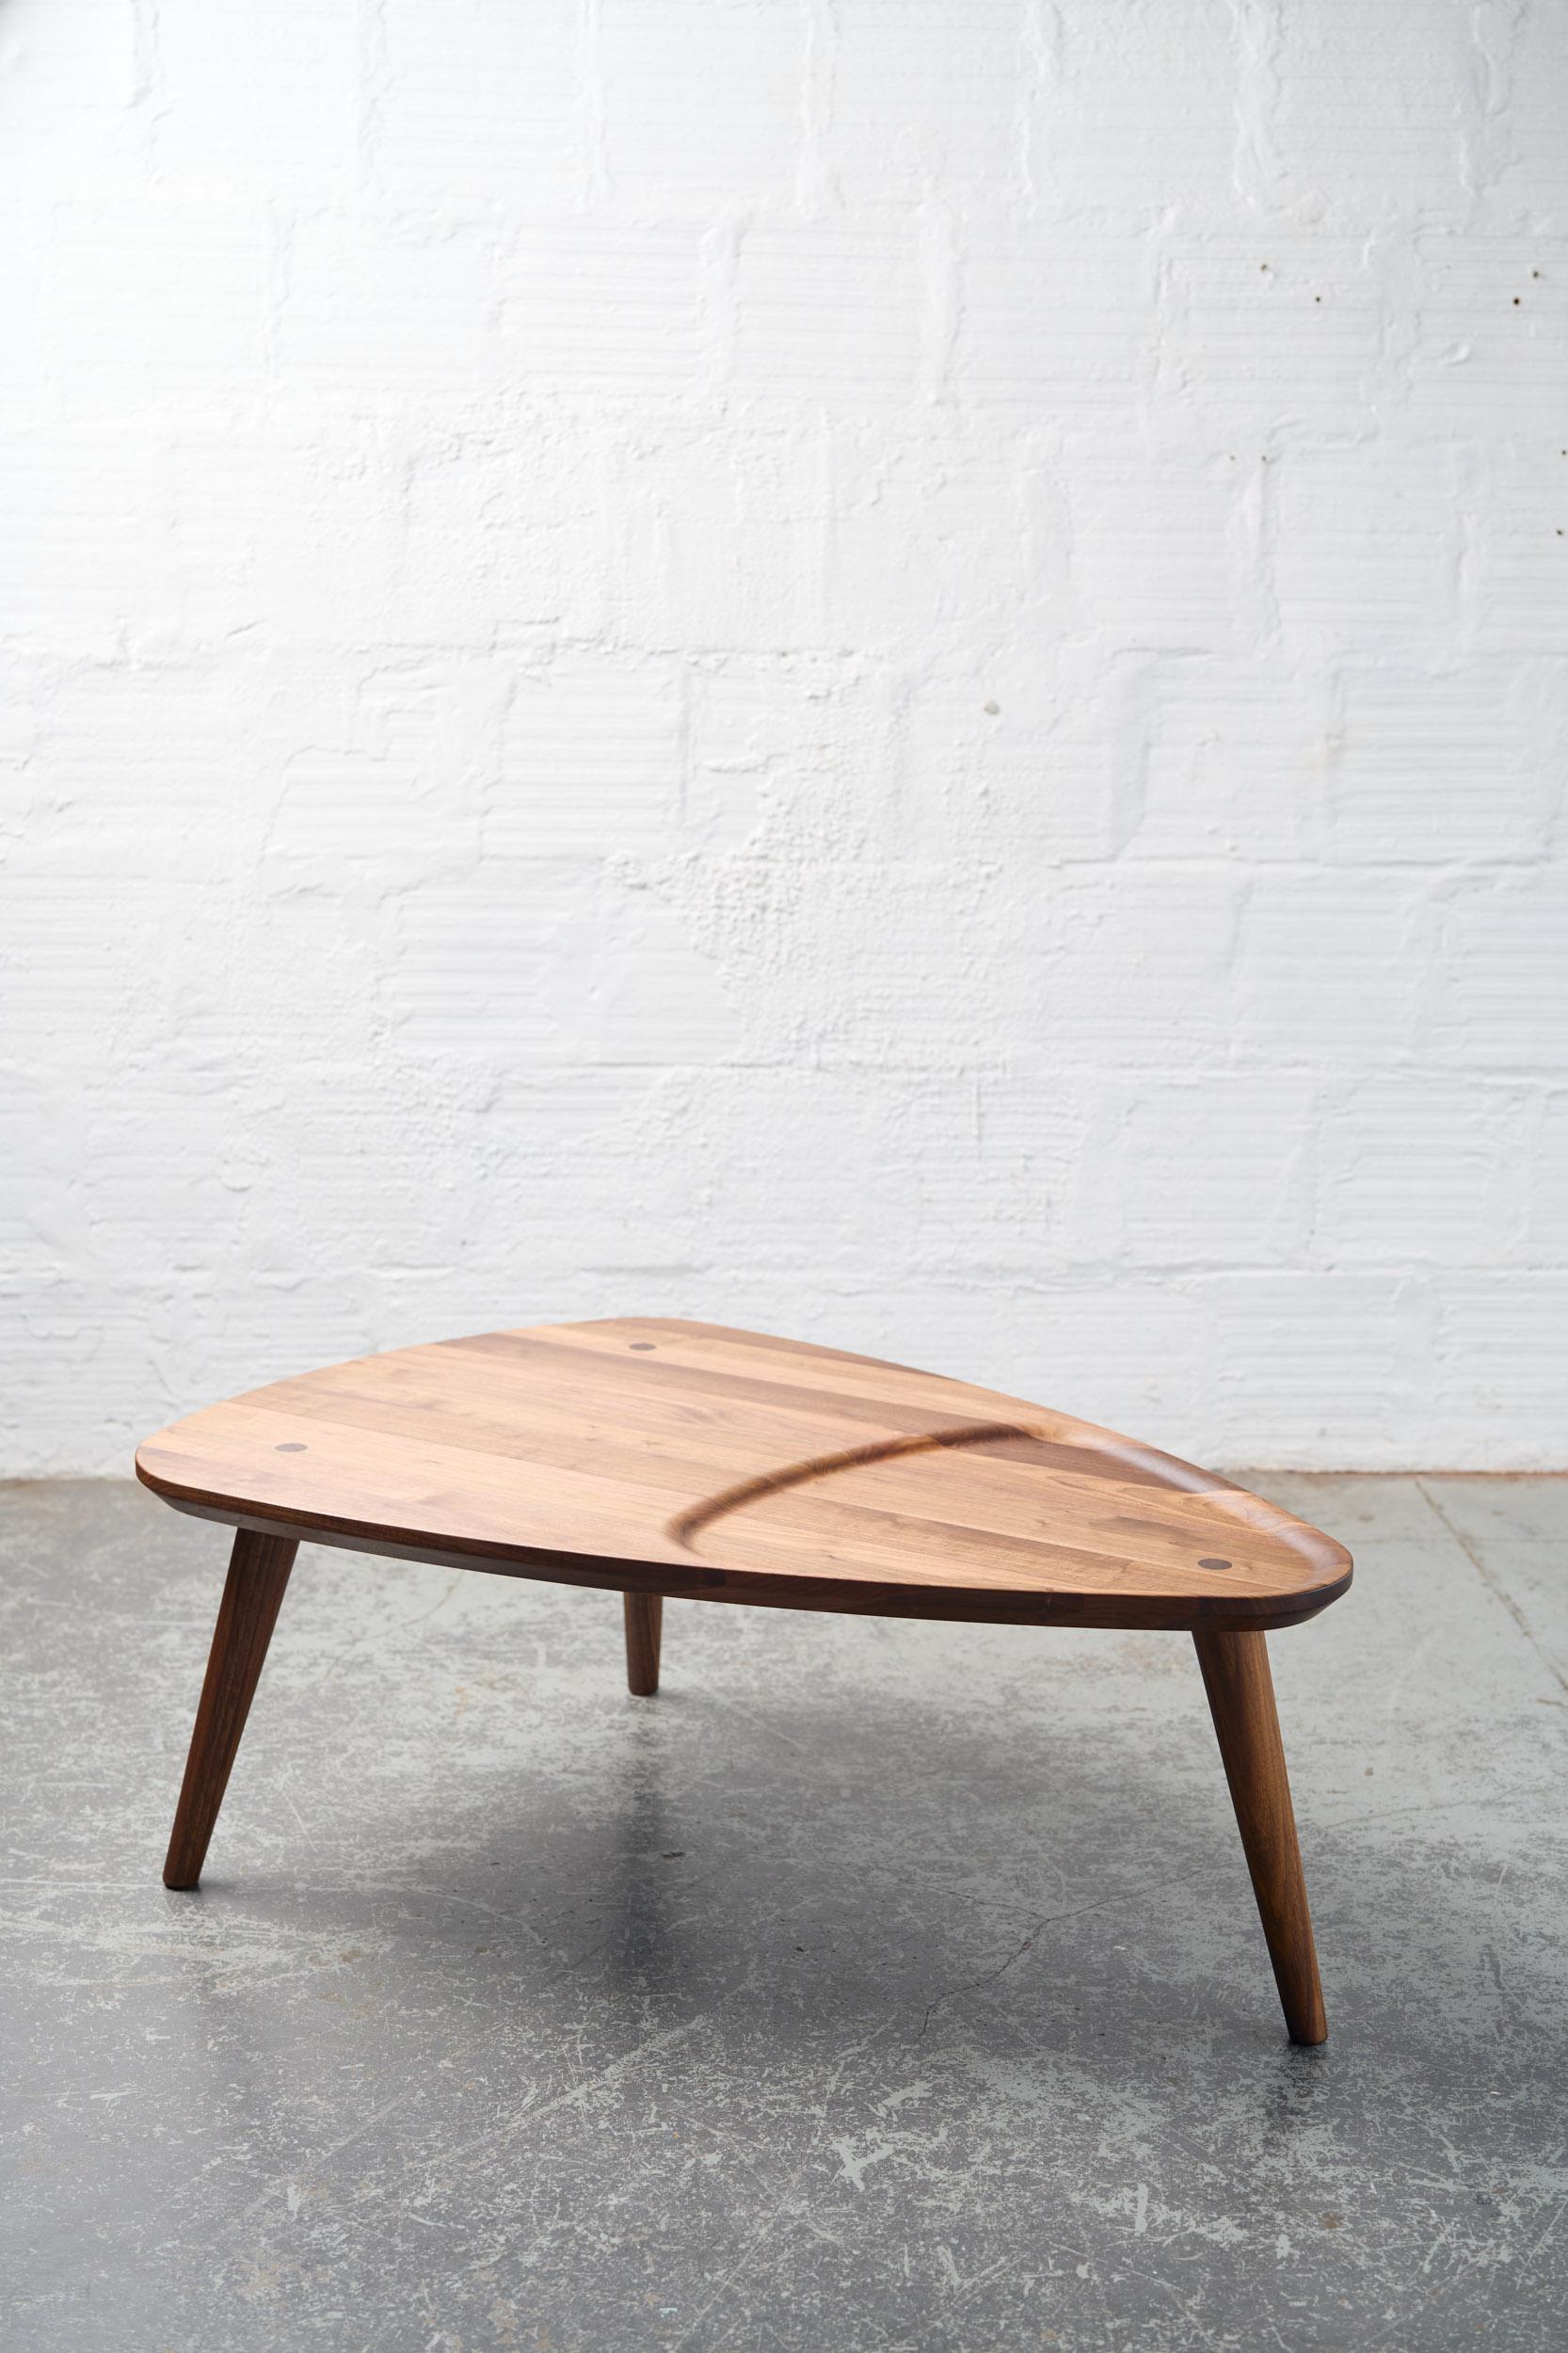 Walnut Oxbend Coffee Table by Fernweh Woodworking
Dimensions: Side A 127 x Side B 122 x Side C 89 x H 47 cm.
Materials: Walnut.

Available in charcoal ash and white ash. Also available in 40.5 cm height. Please contact us.

Justin Nelson
He is a